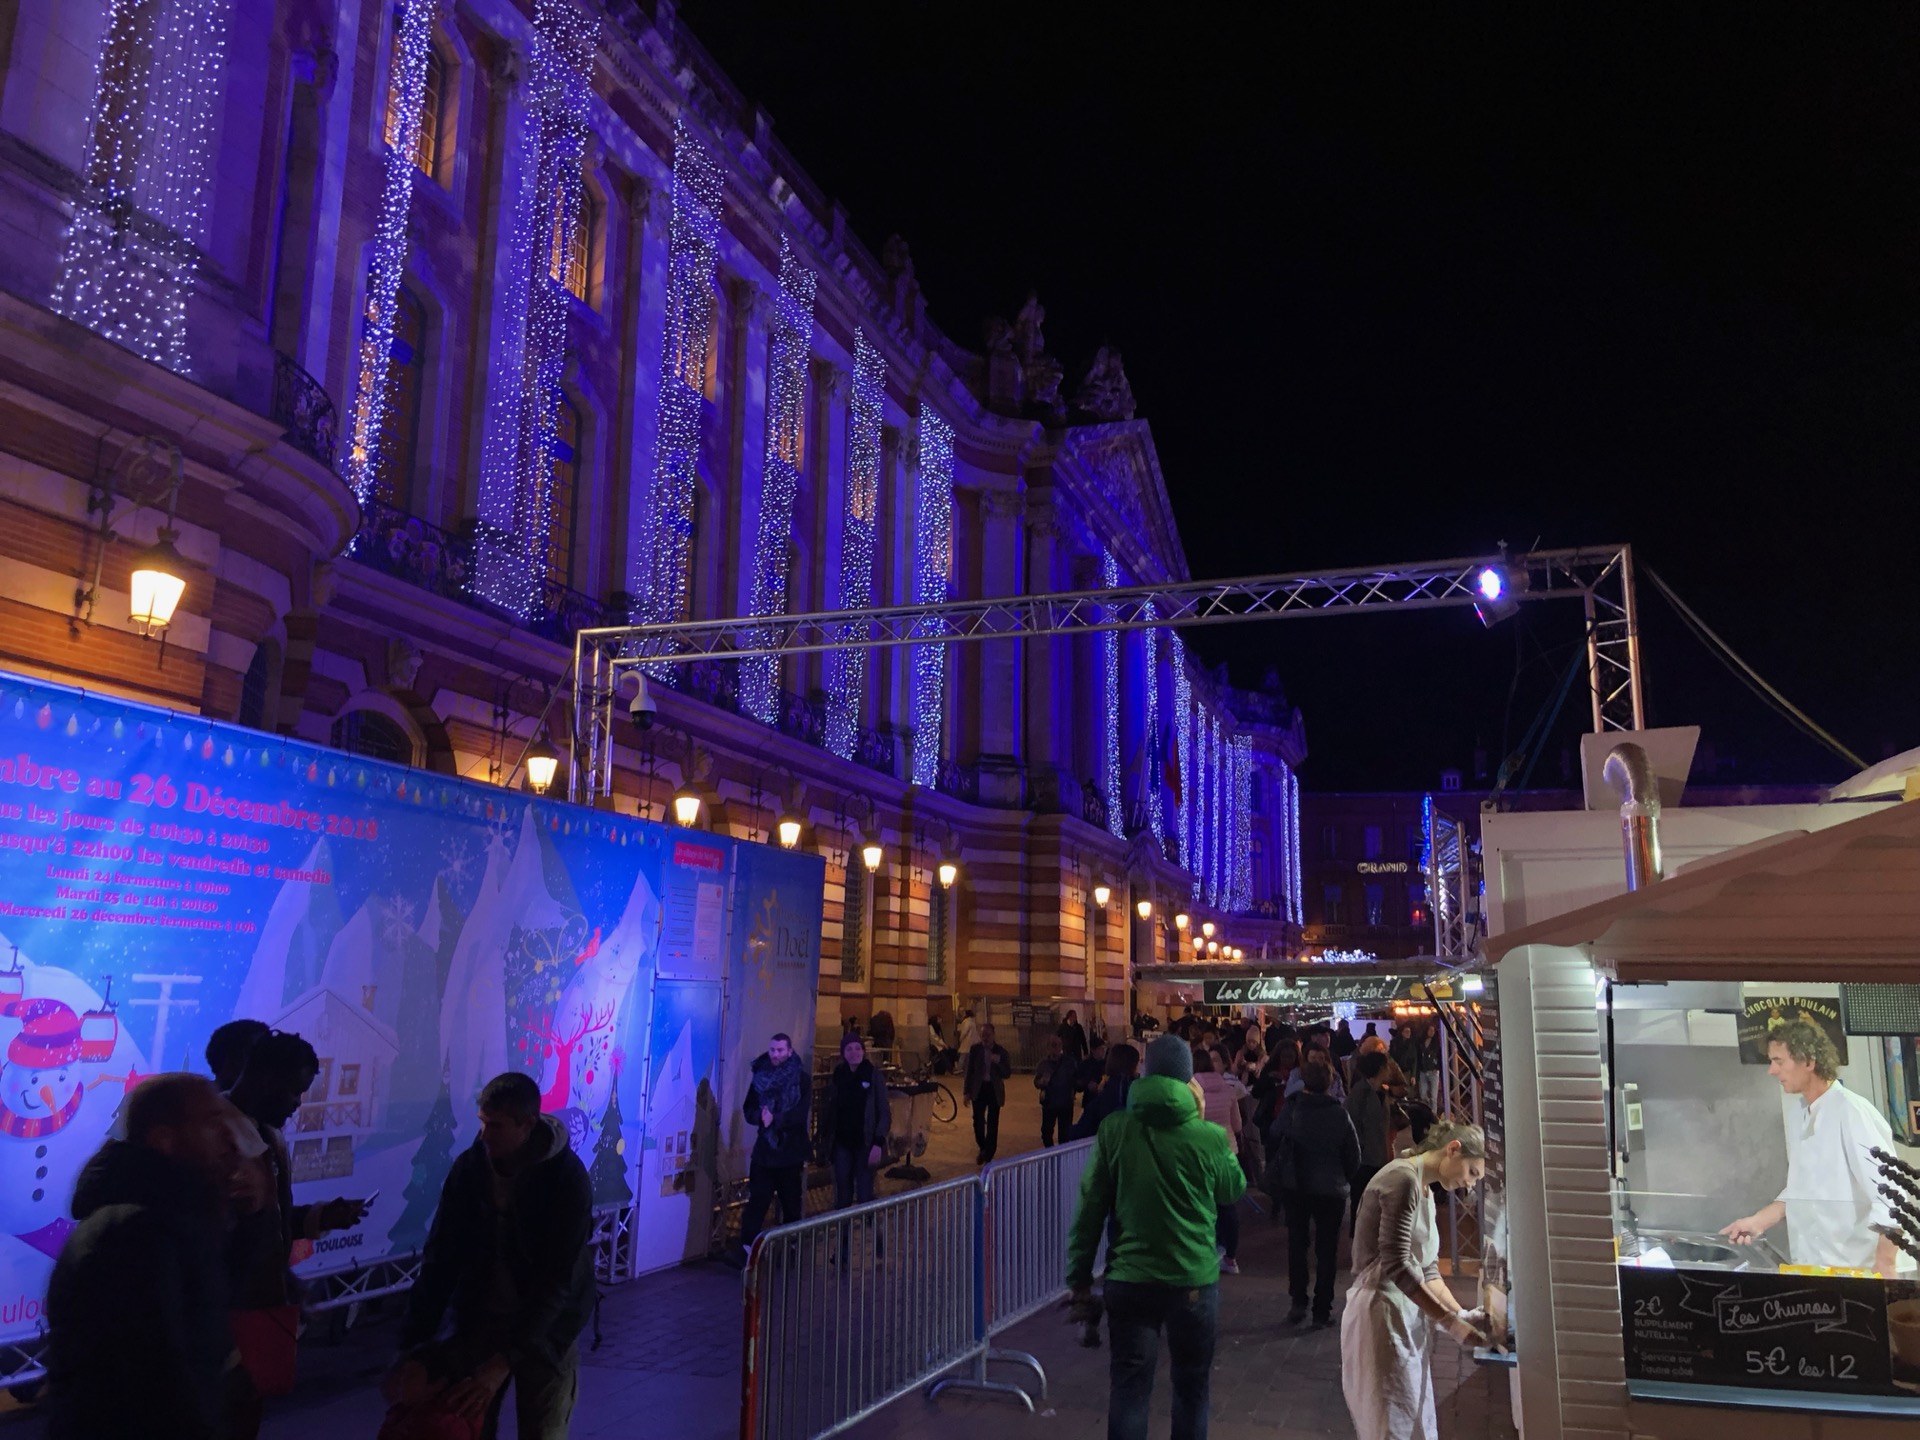  The entrance to the Christmas market. 